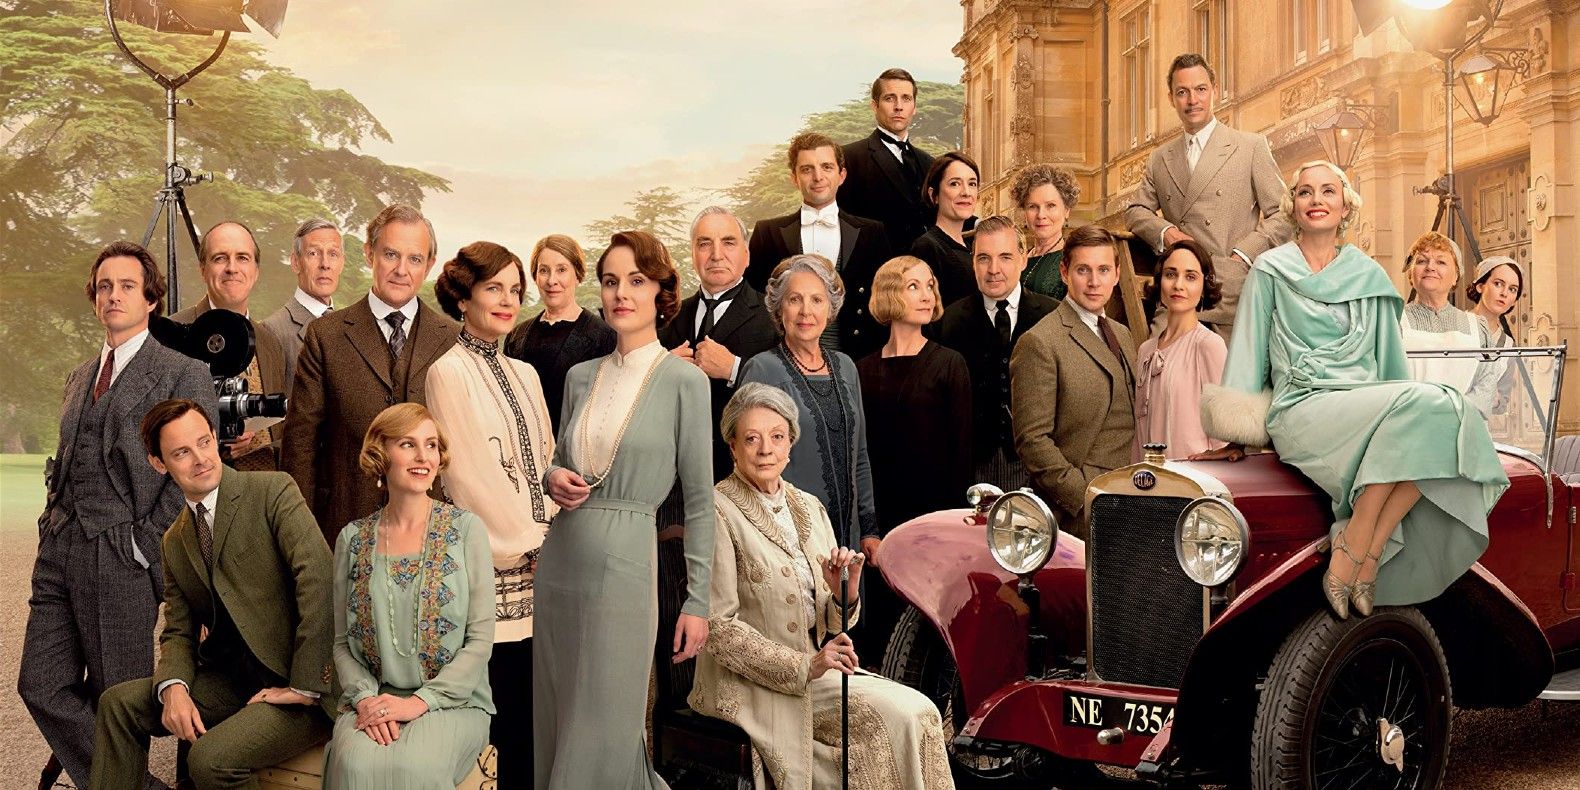 The cast of Downton Abbey: A New Era pose in front of the titular castle.